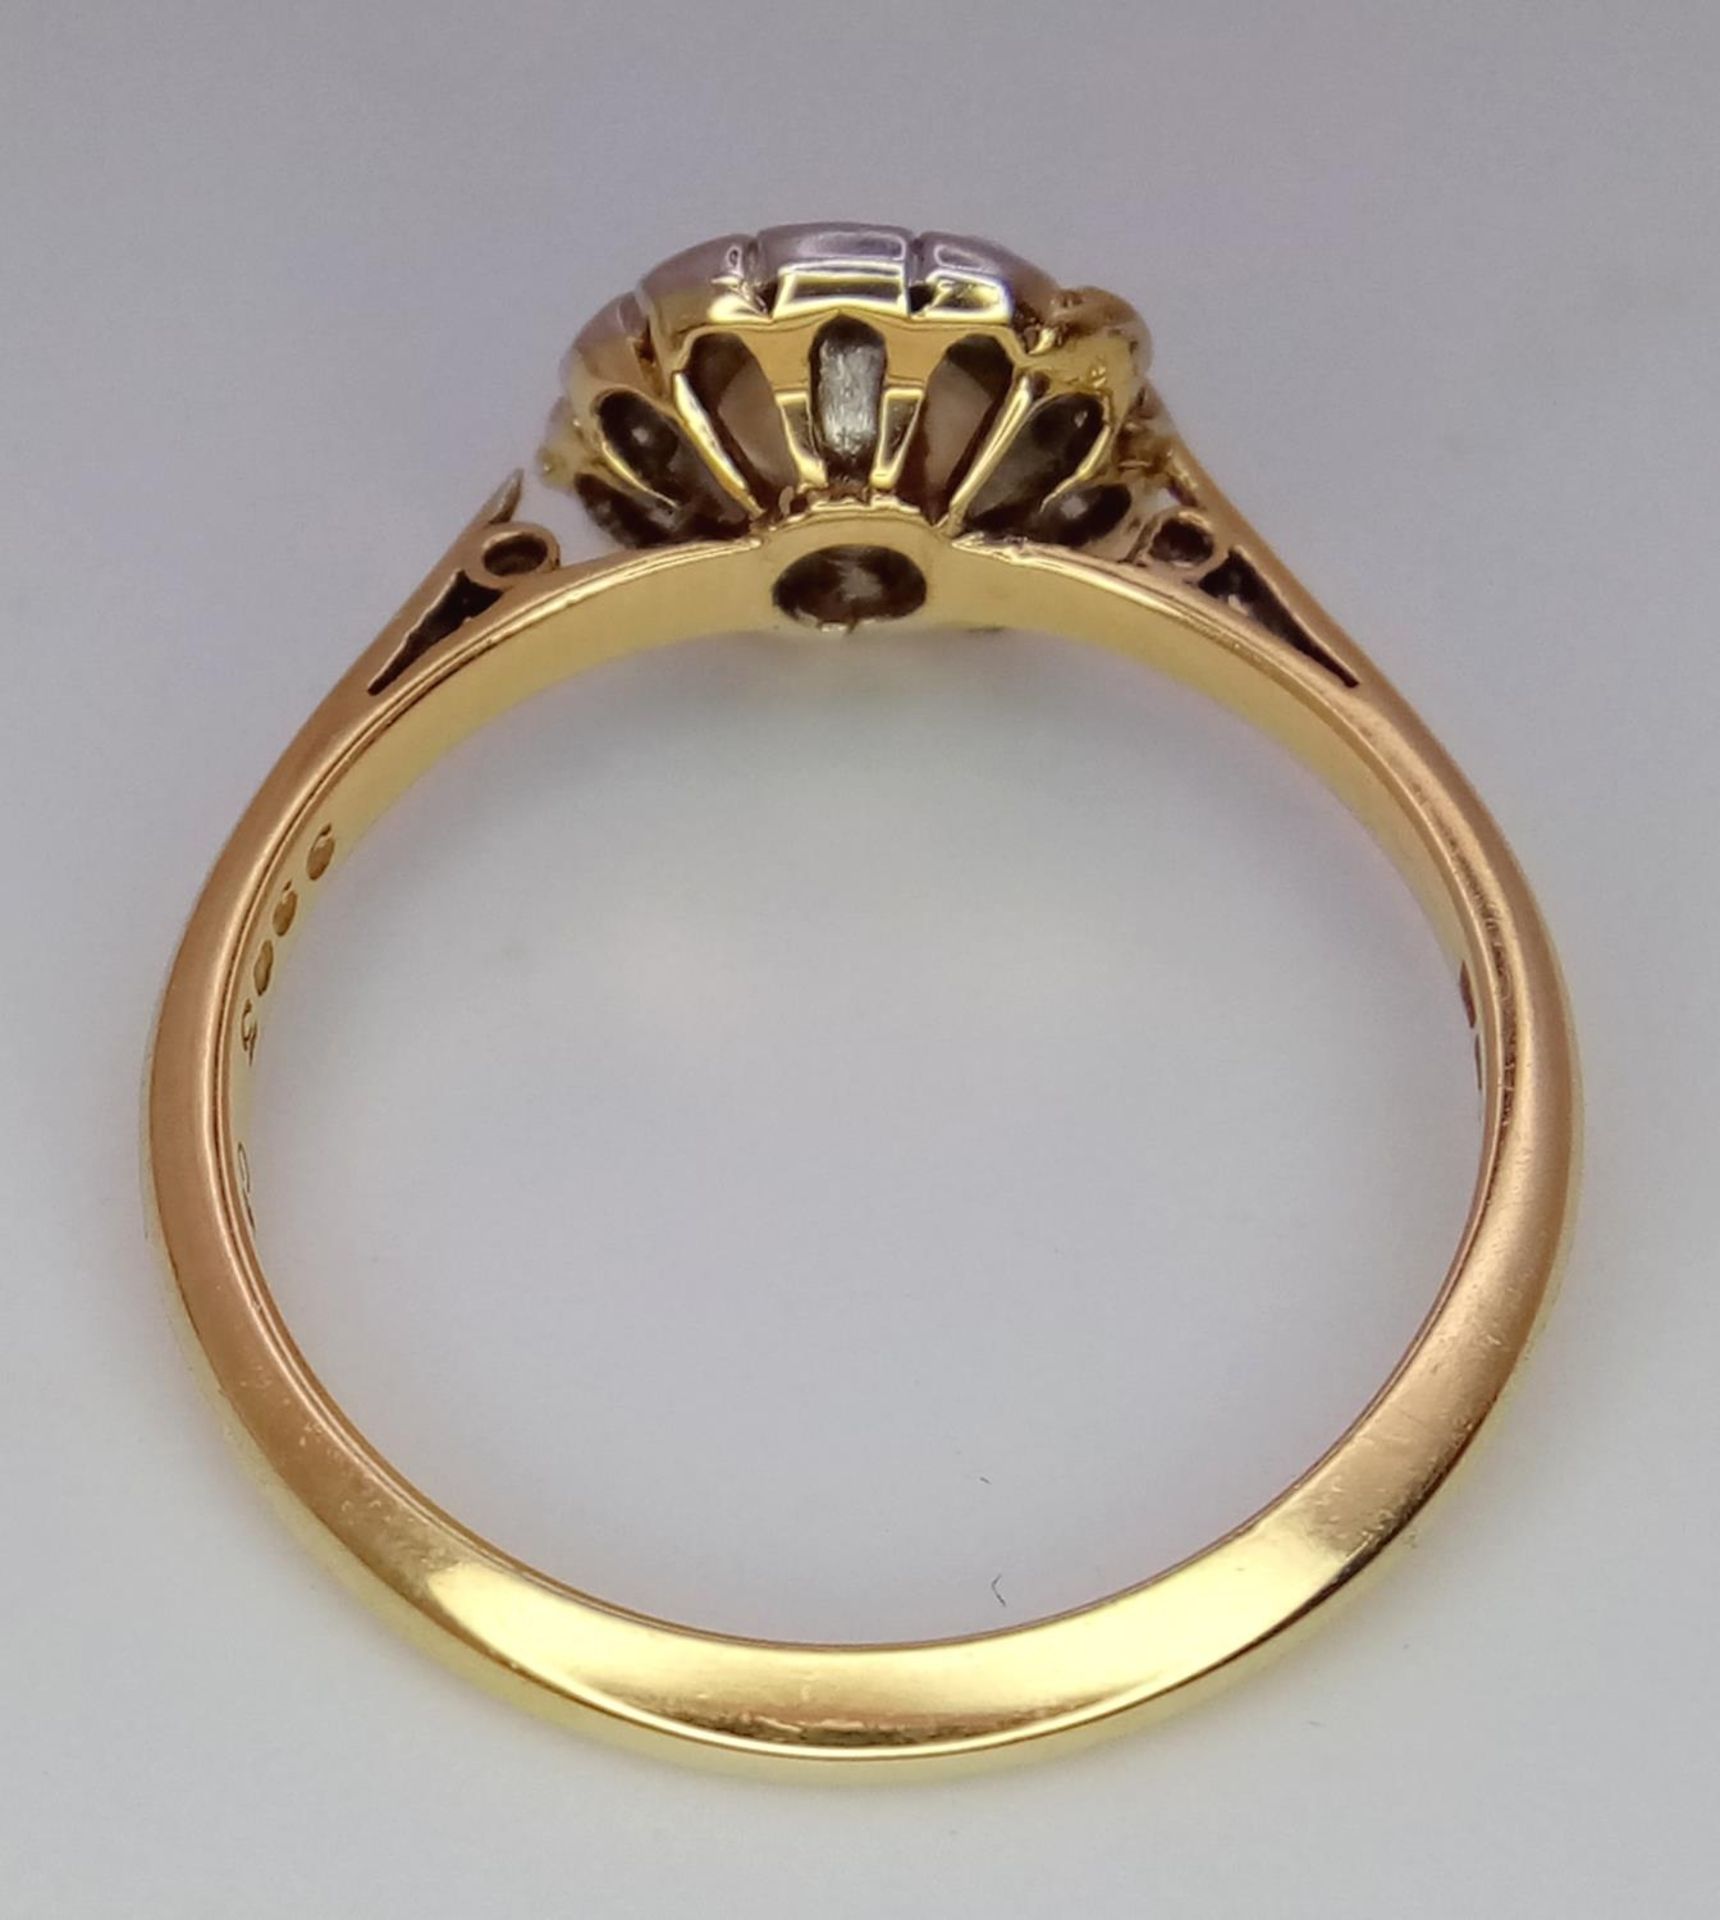 AN 18K YELLOW GOLD & PLATINUM DIAMOND RING. 0.35ctw, size L, 2.5g total weight. Ref: SC 9046 - Image 4 of 5